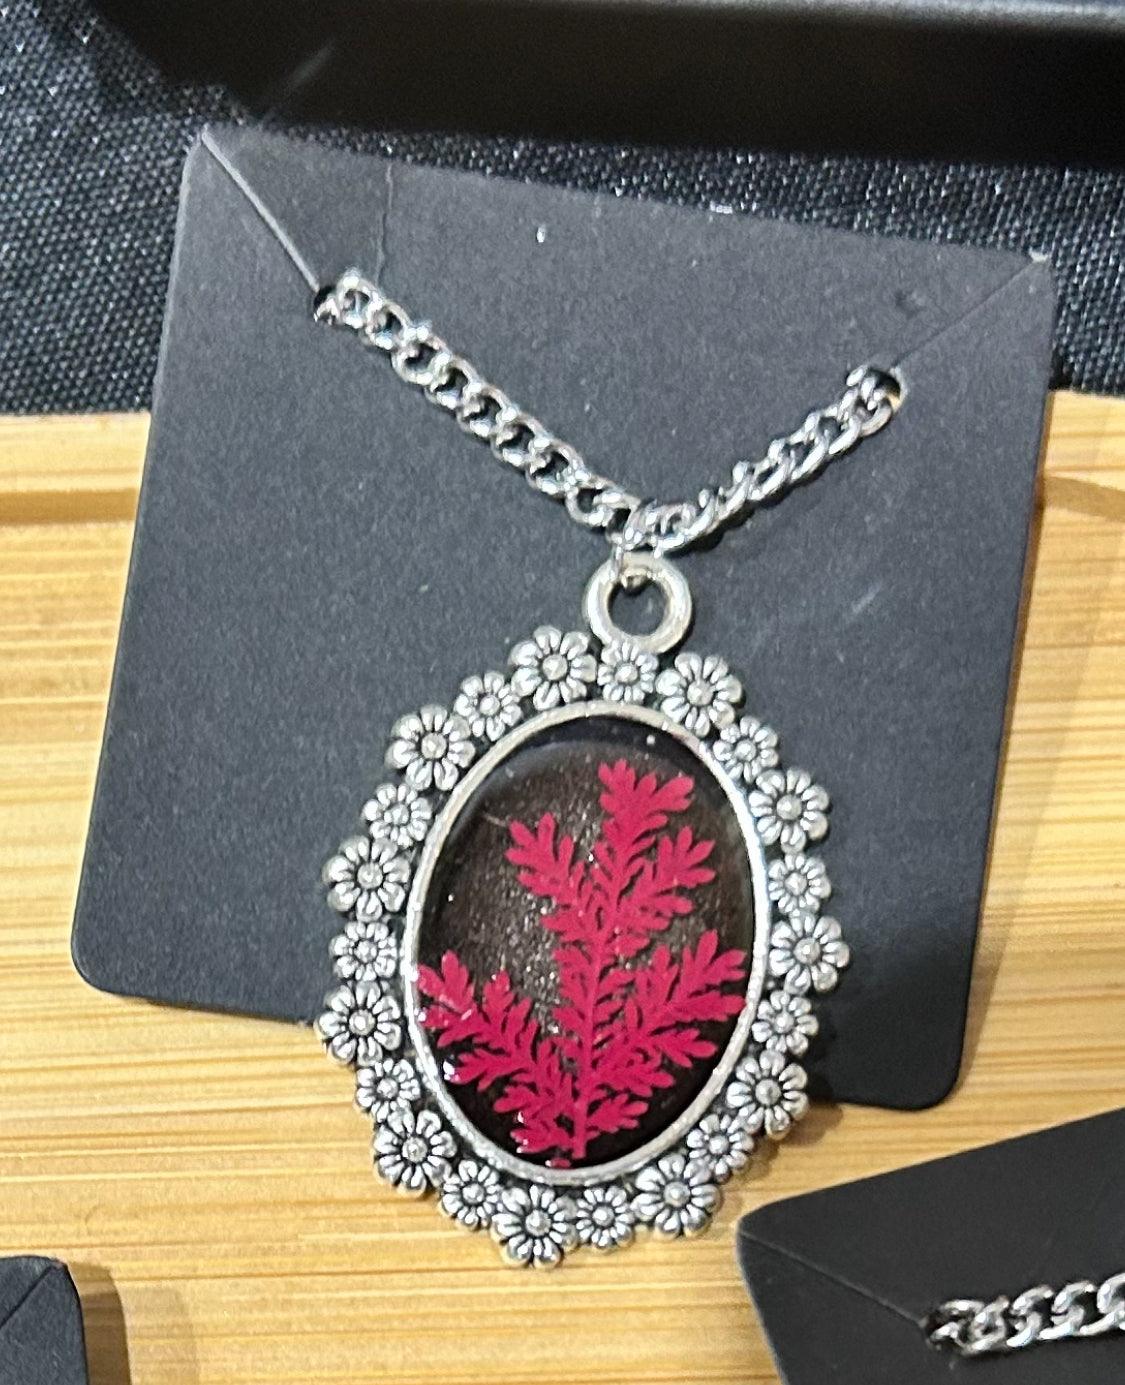 Red fern leaf necklace set on a black background and encased in a silver frame with carved flowers around it.